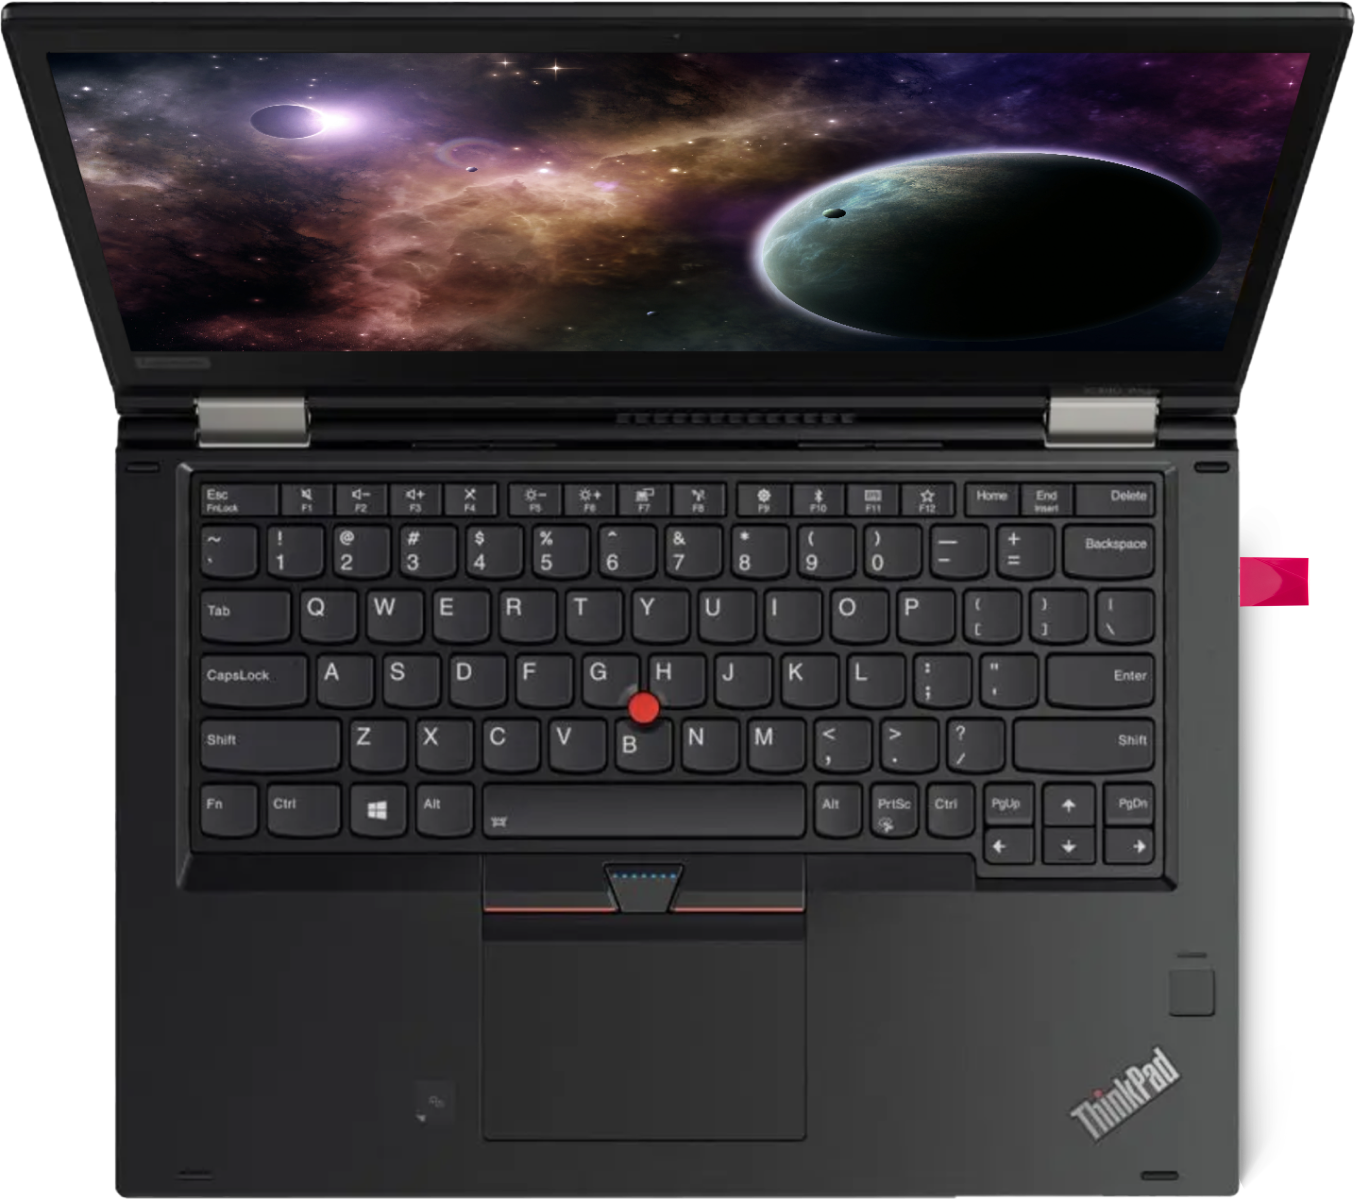 An open Thinkpad laptop with Luna Display plugged in